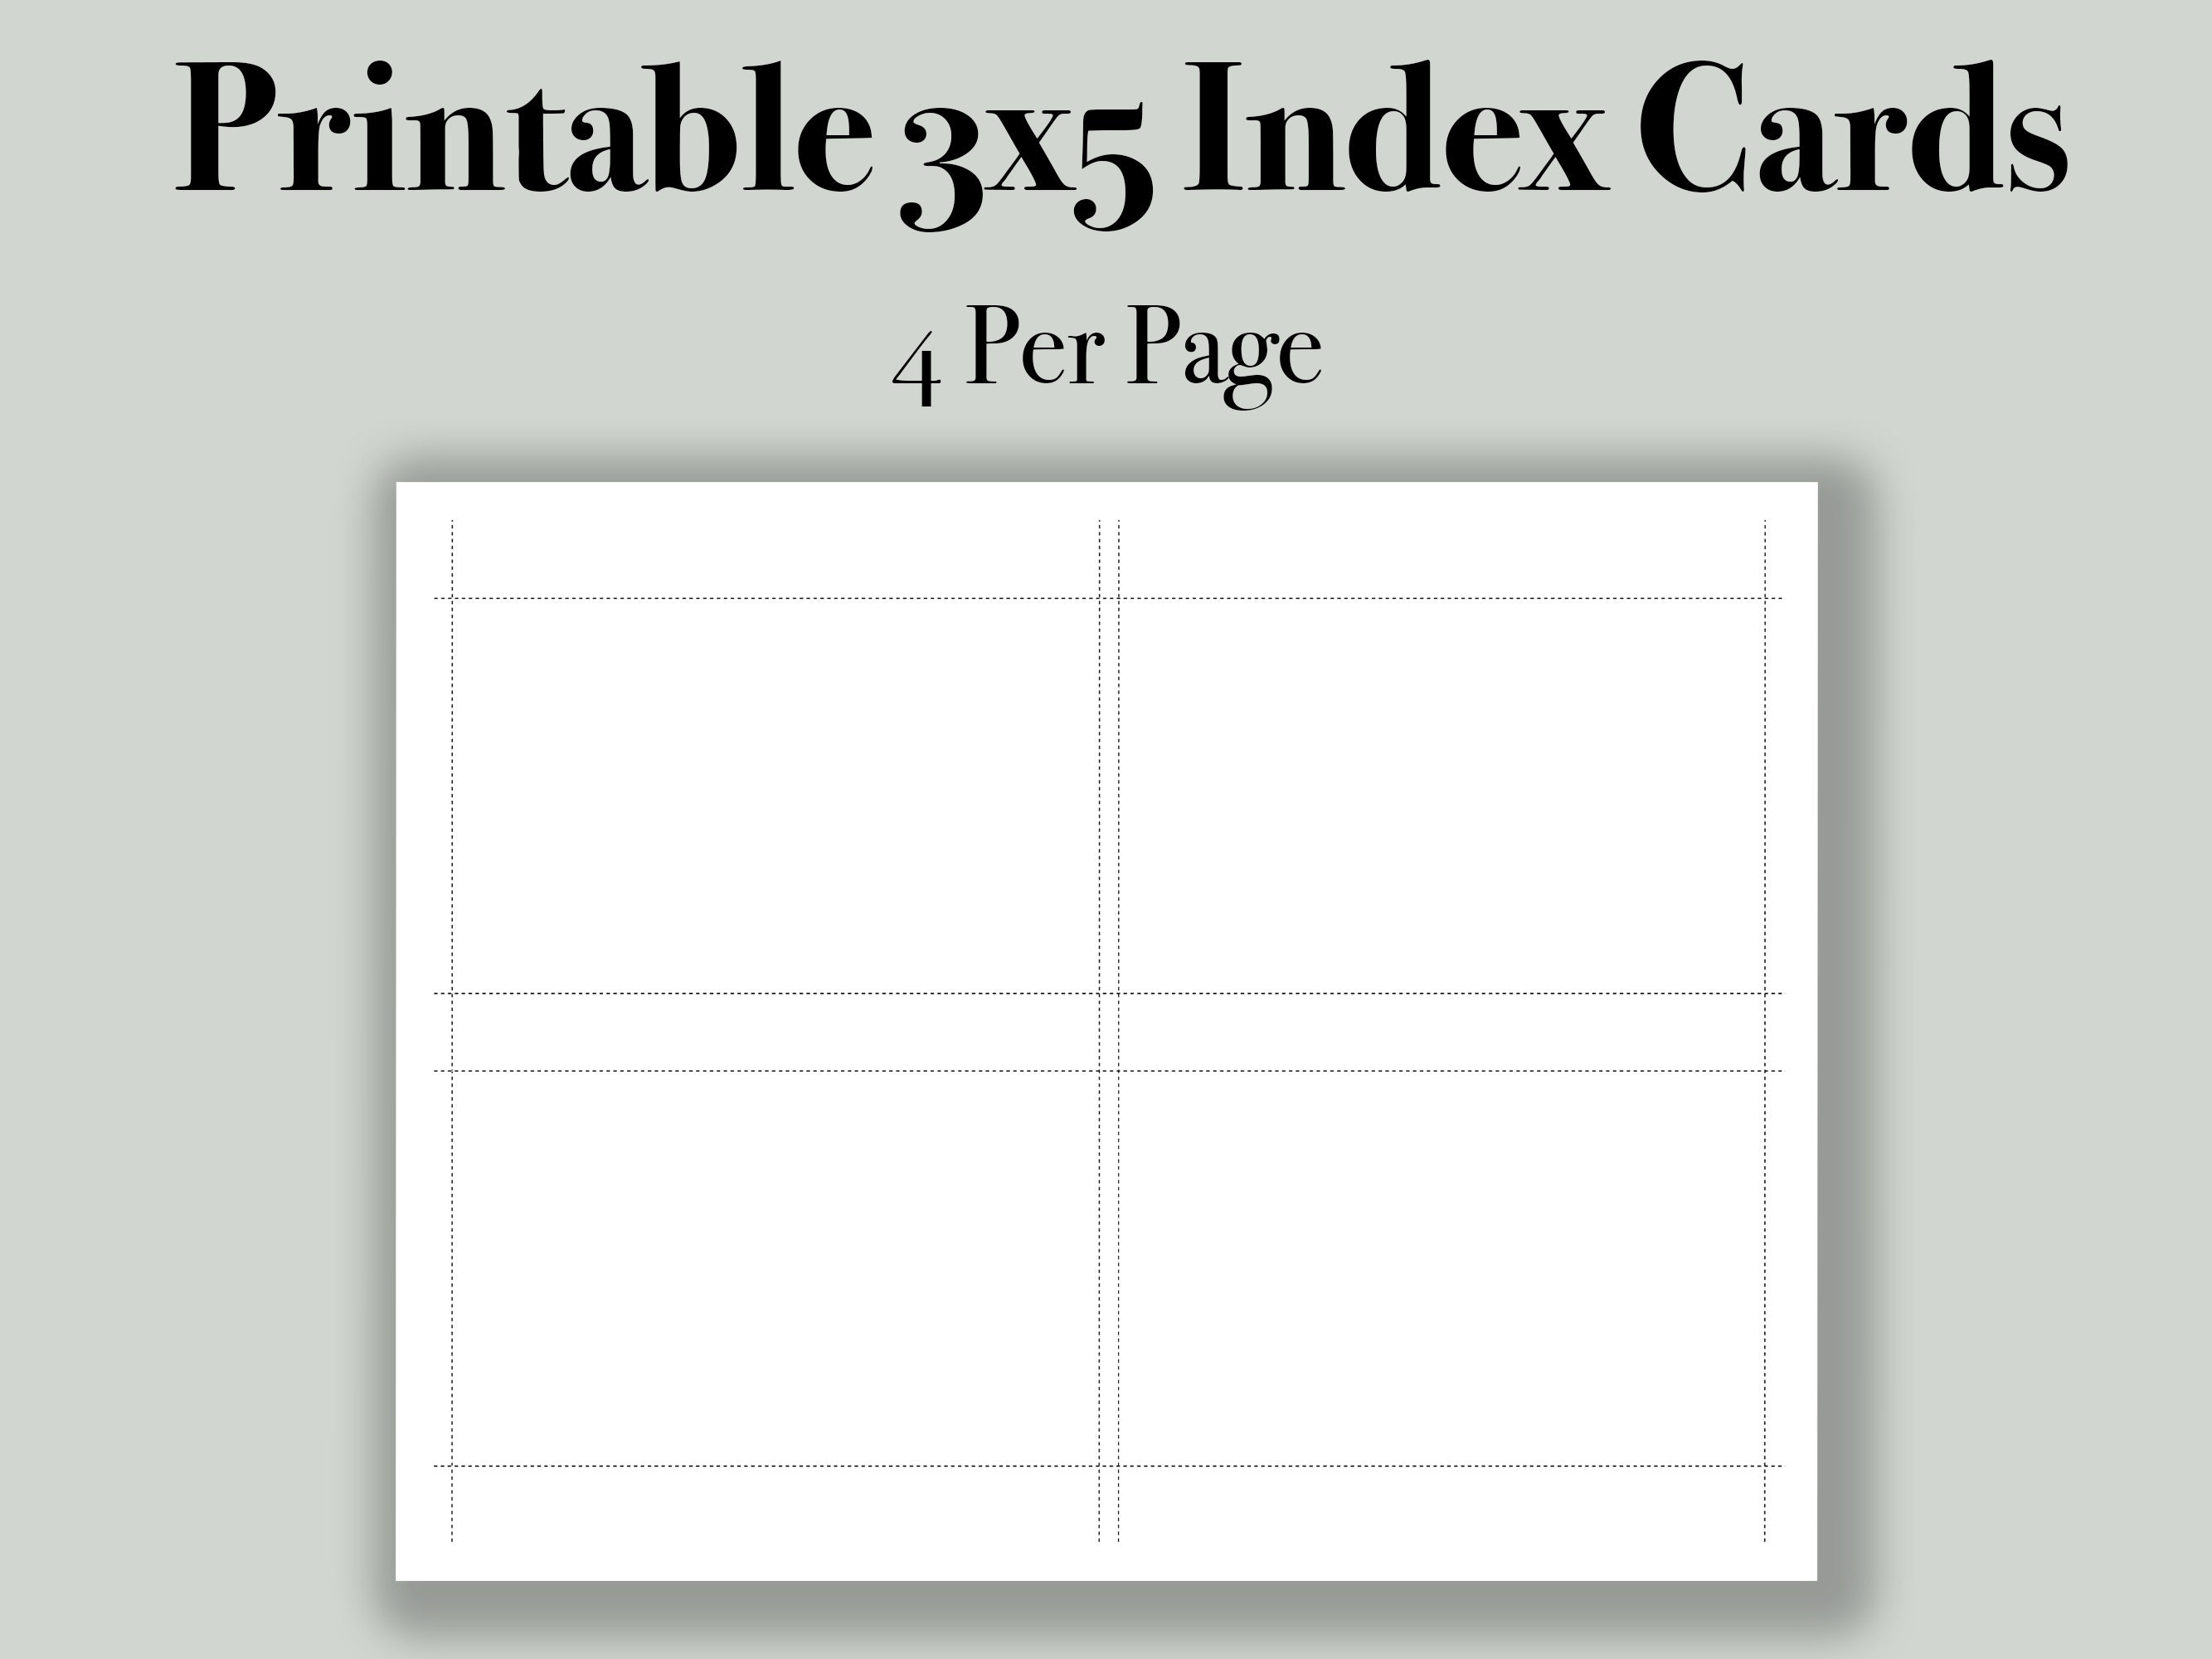 how to print on 3x5 index cards using a printer